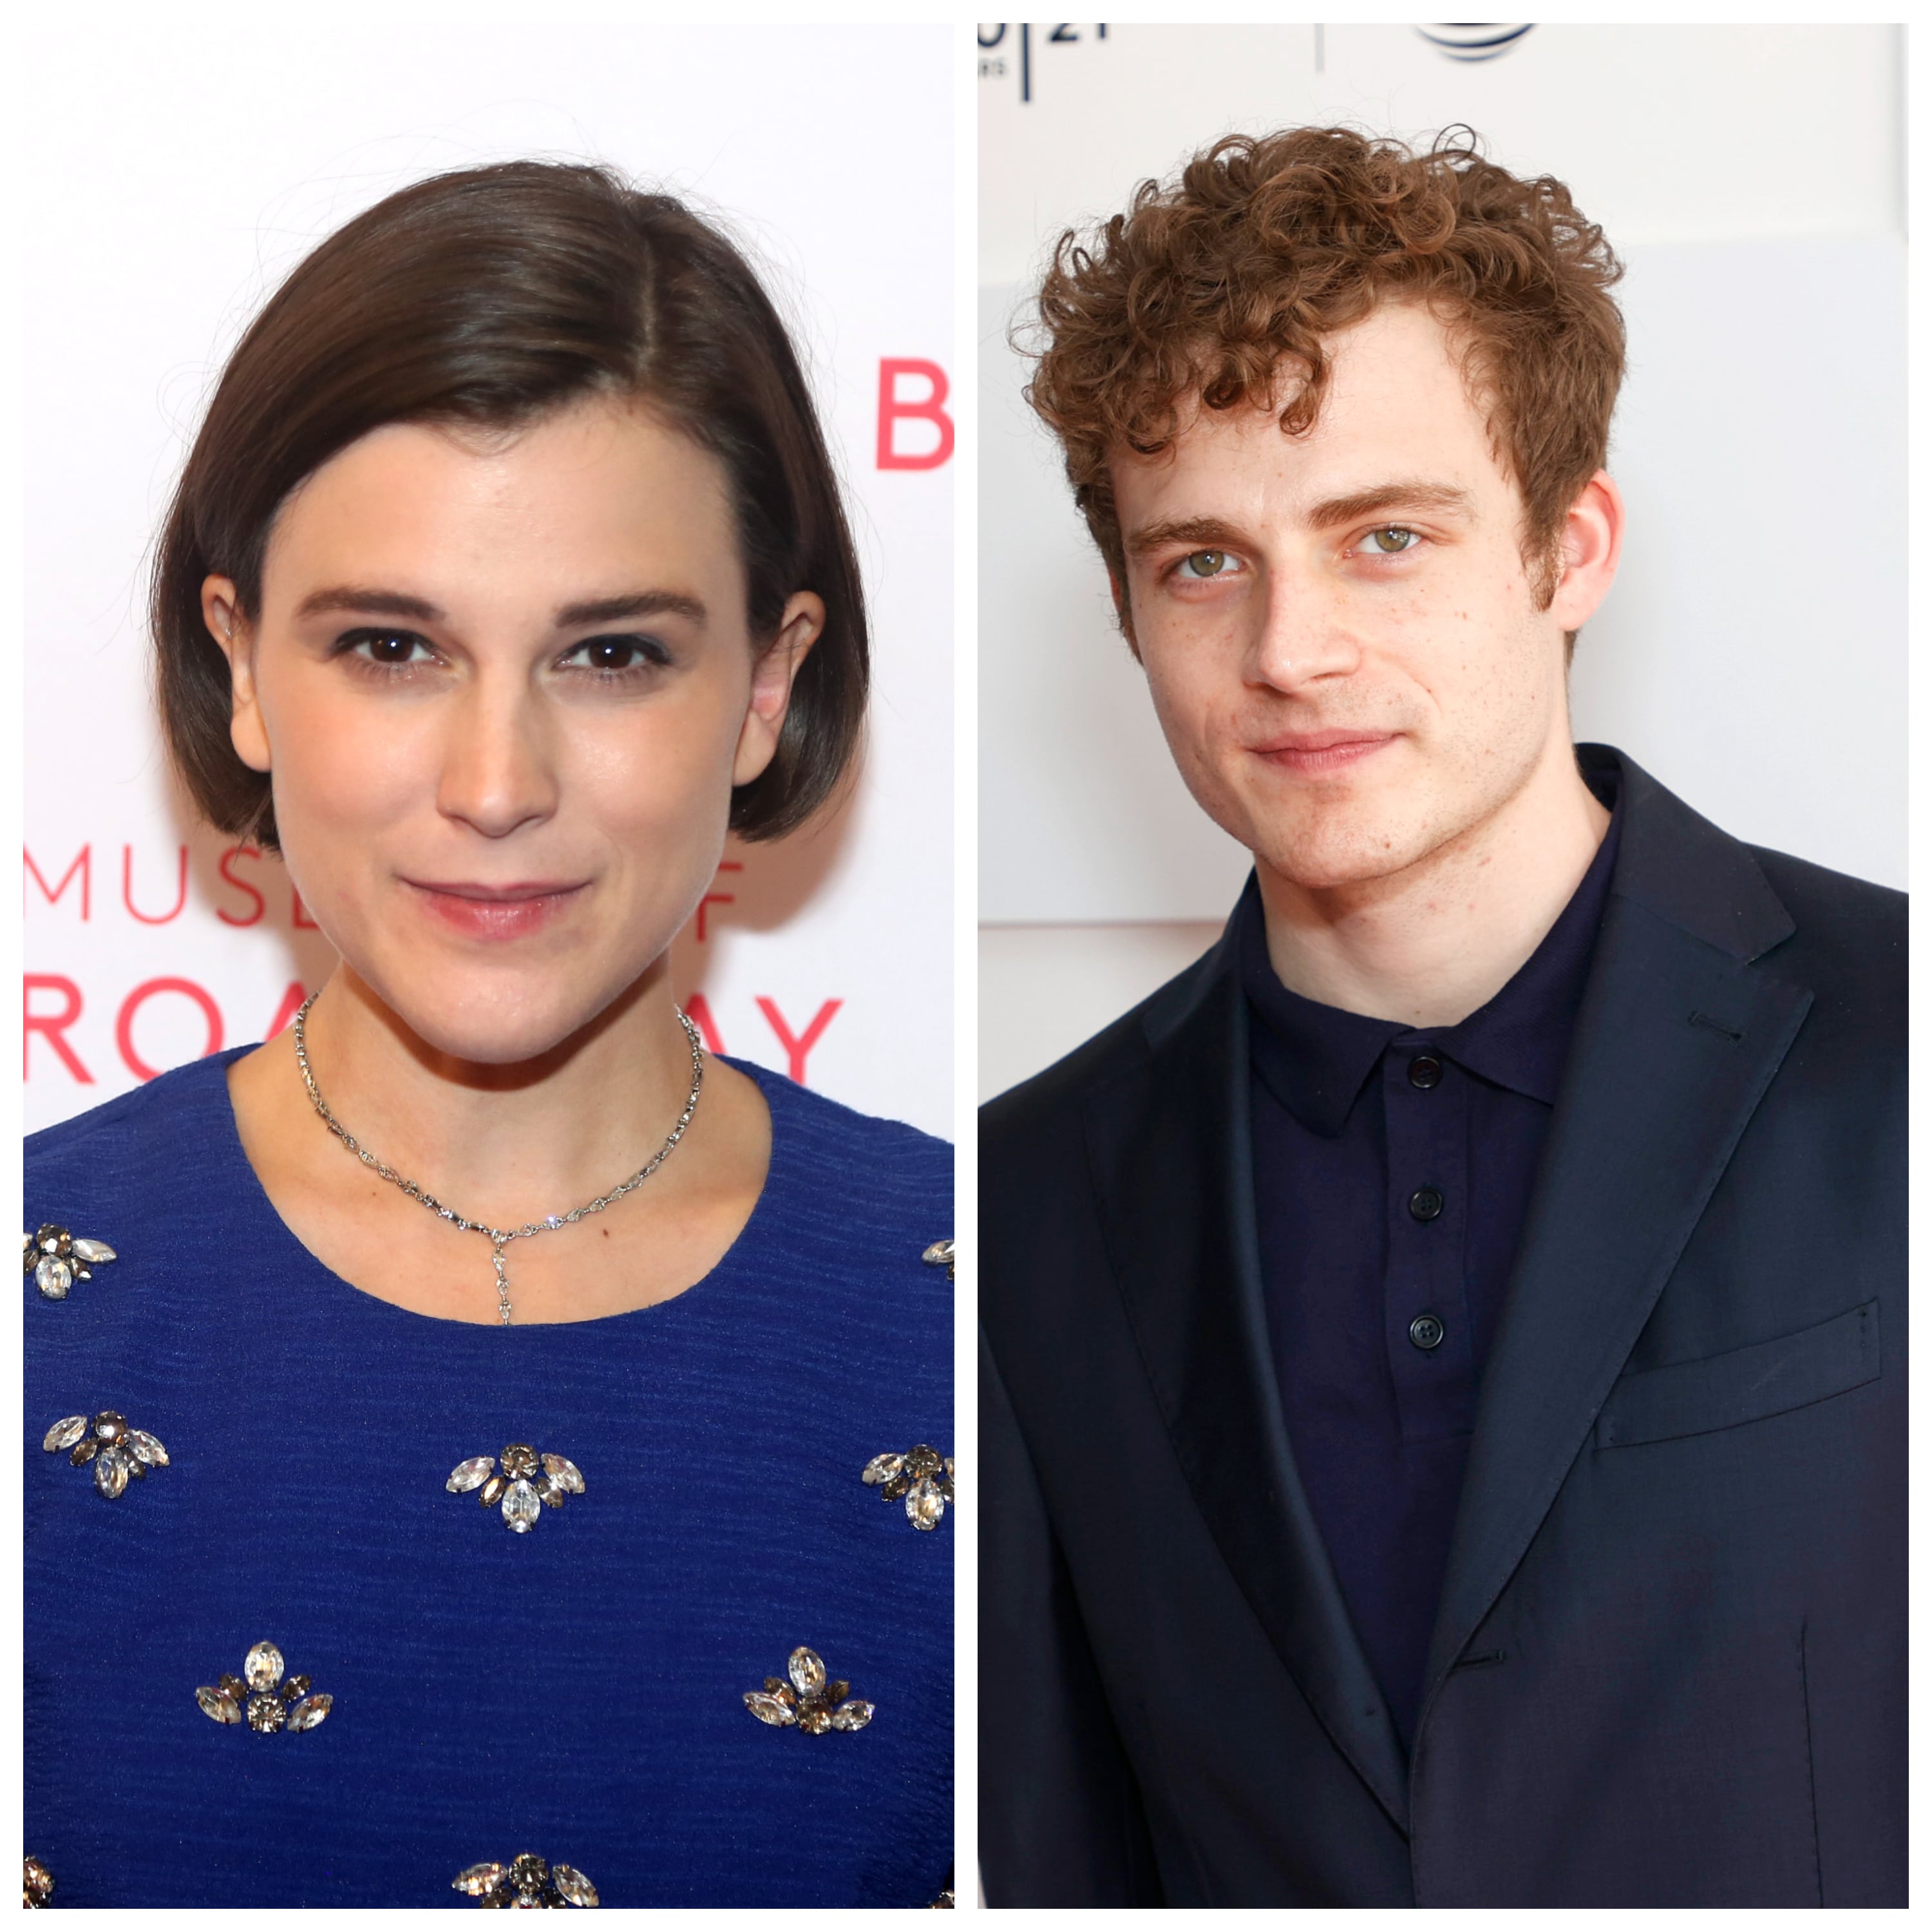 Alexandra Socha and Ben Rosenfield at red carpet events